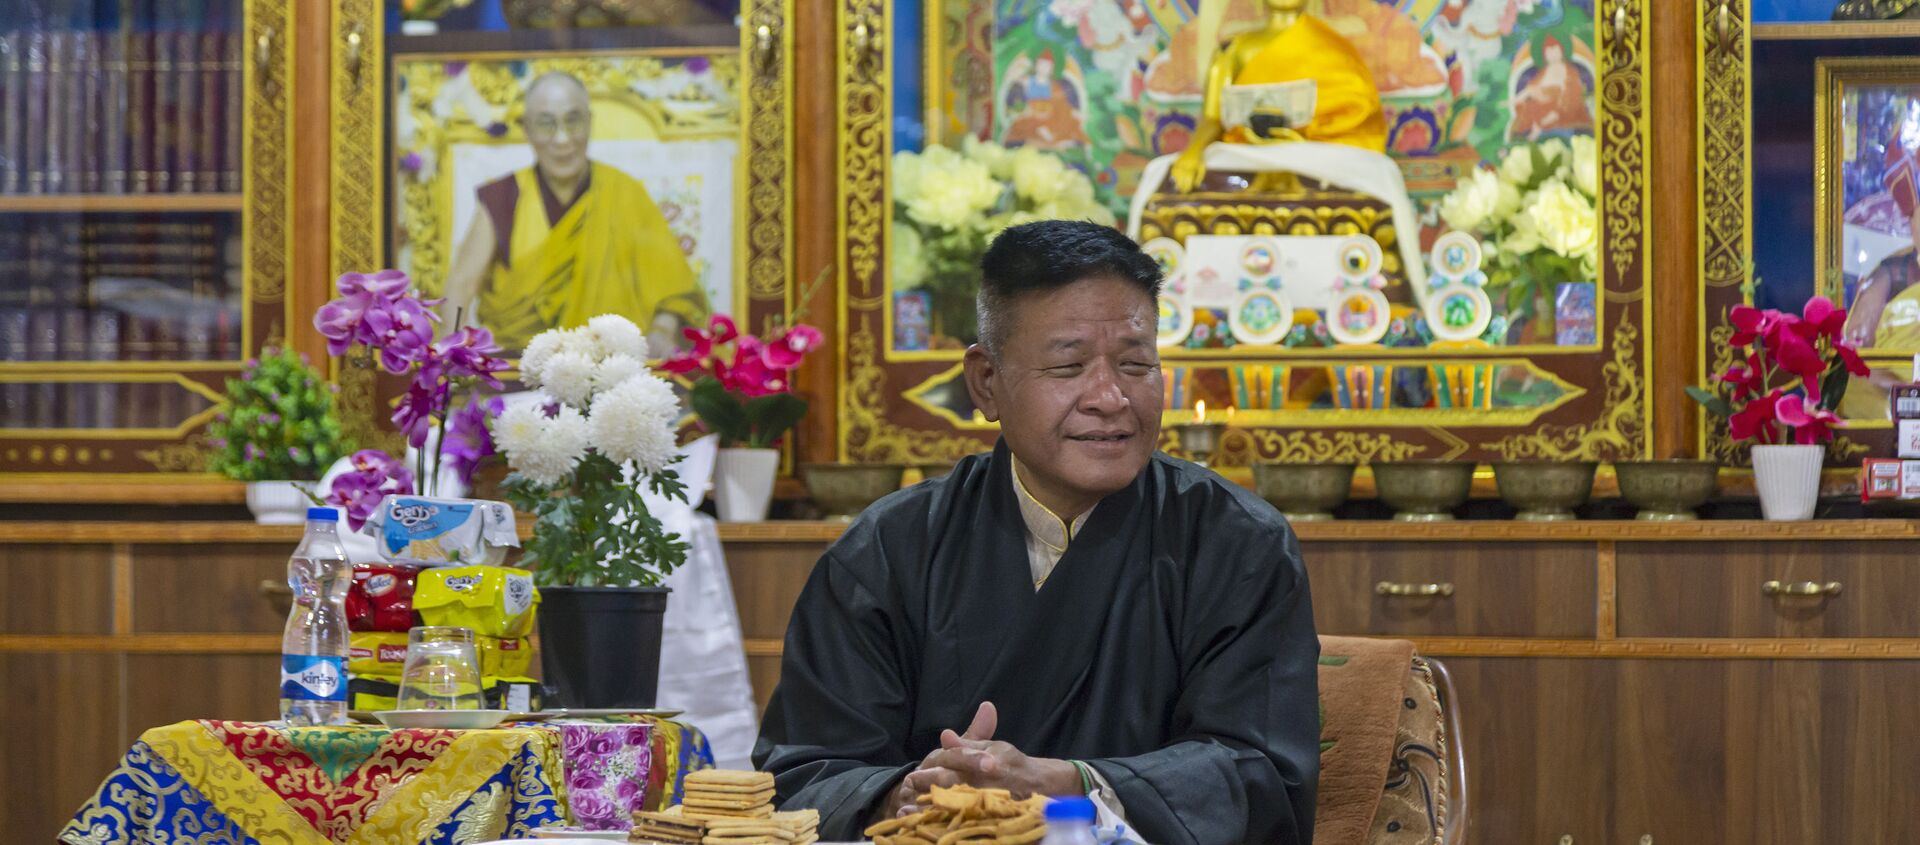 Penpa Tsering, the newly elected President of the Central Tibetan Administration, relaxes at the Ghadong monastery in Dharmsala, India, Thursday, May 27, 2021.  - Sputnik International, 1920, 05.06.2021